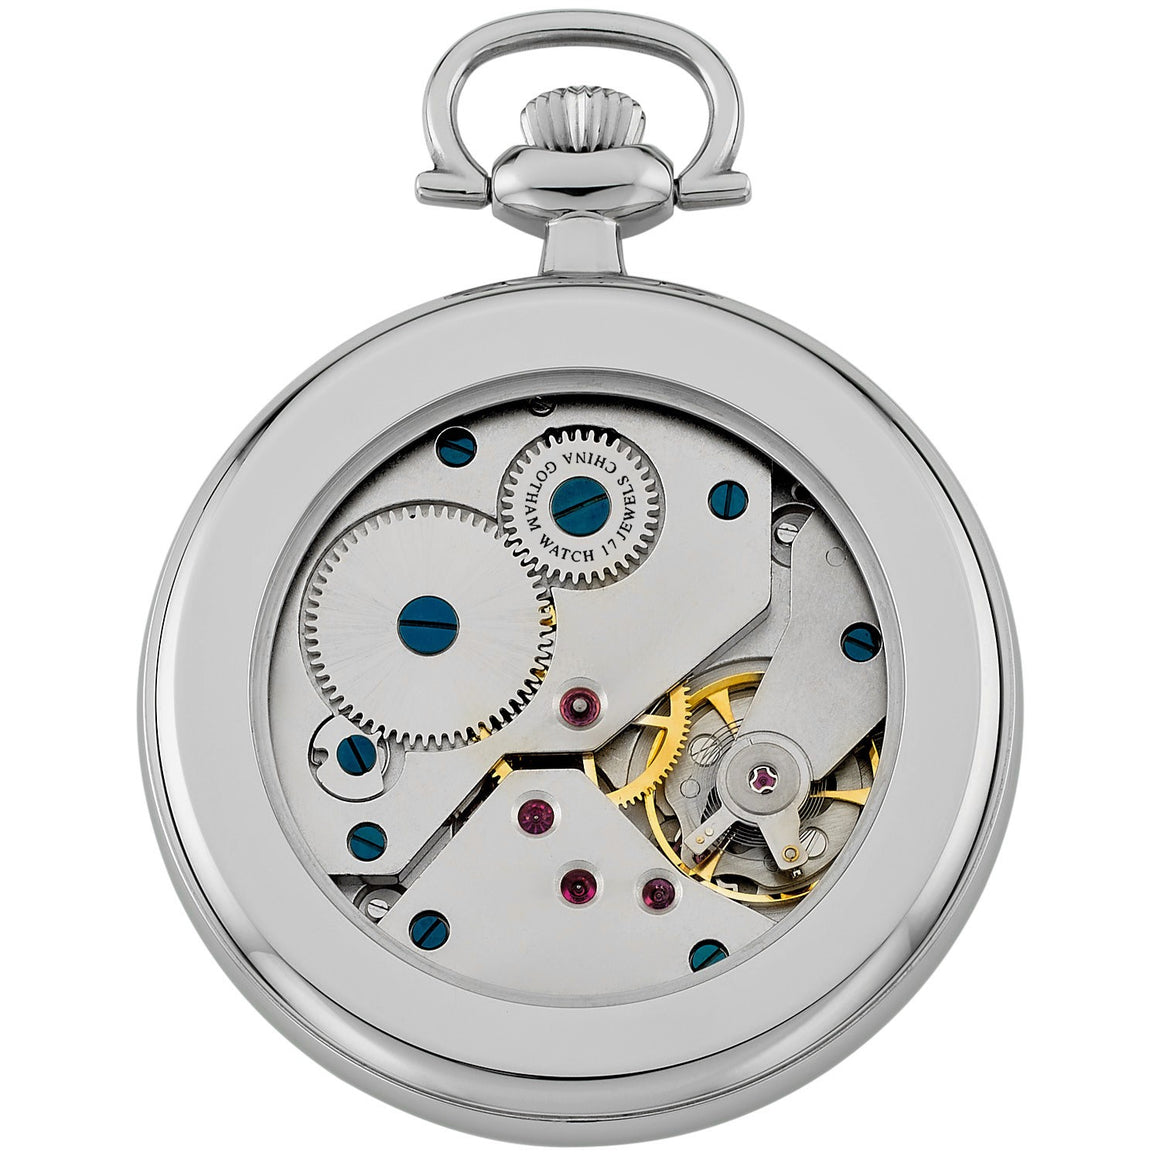 Gotham Classic Series Stainless Steel Open Face 17 Jewel Mechanical Hand Wind Pocket Watch # GWC14112SB